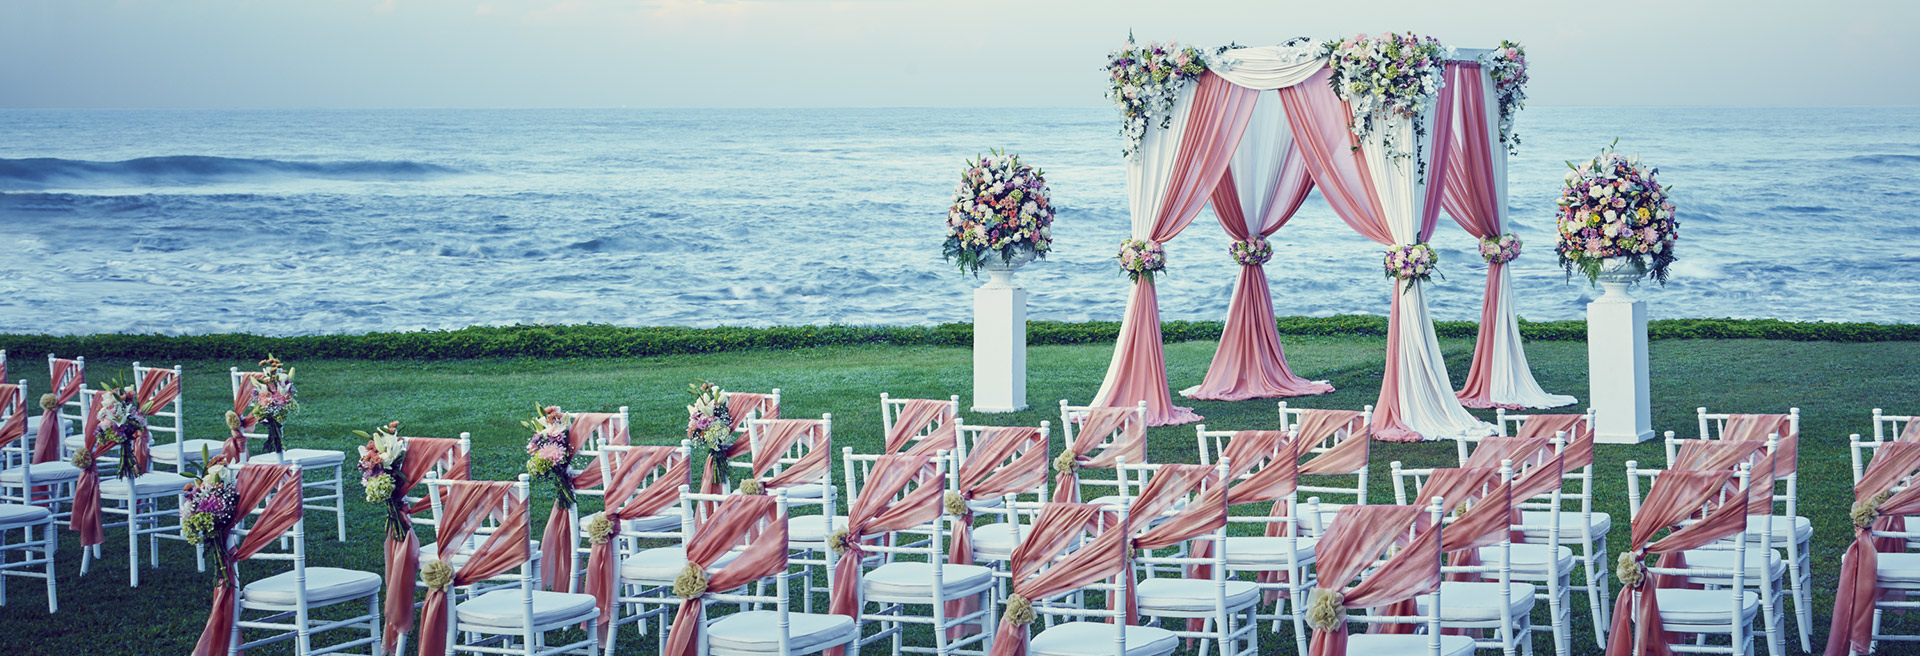 Wedding Hotels Galle Sri Lanka Weddings At Jetwing Lighthouse Galle